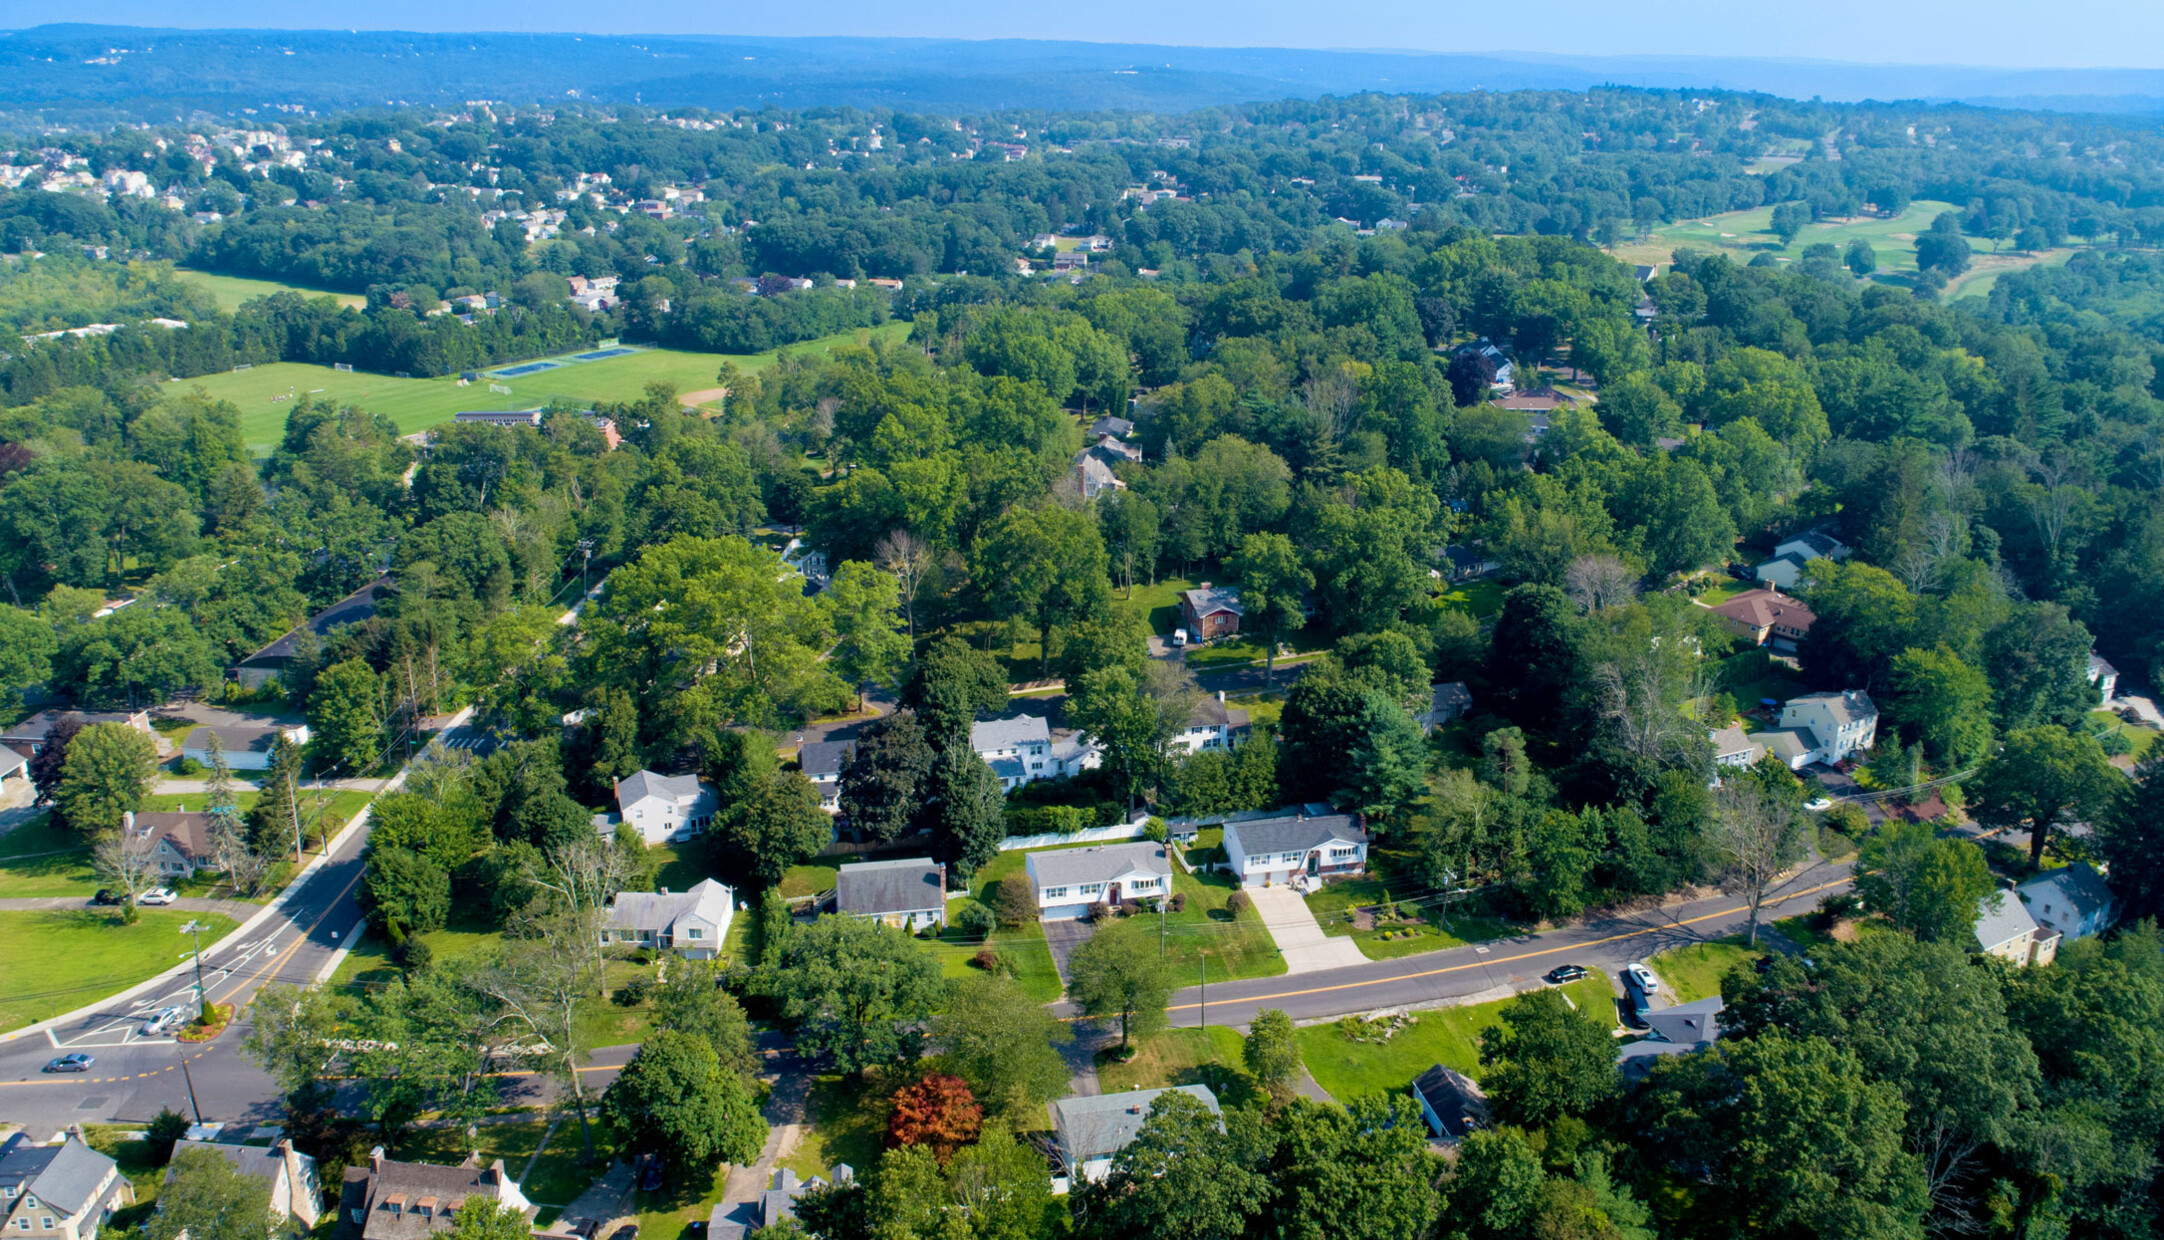 An aerial view of houses and streets in the Country Club neighborhood of Waterbury